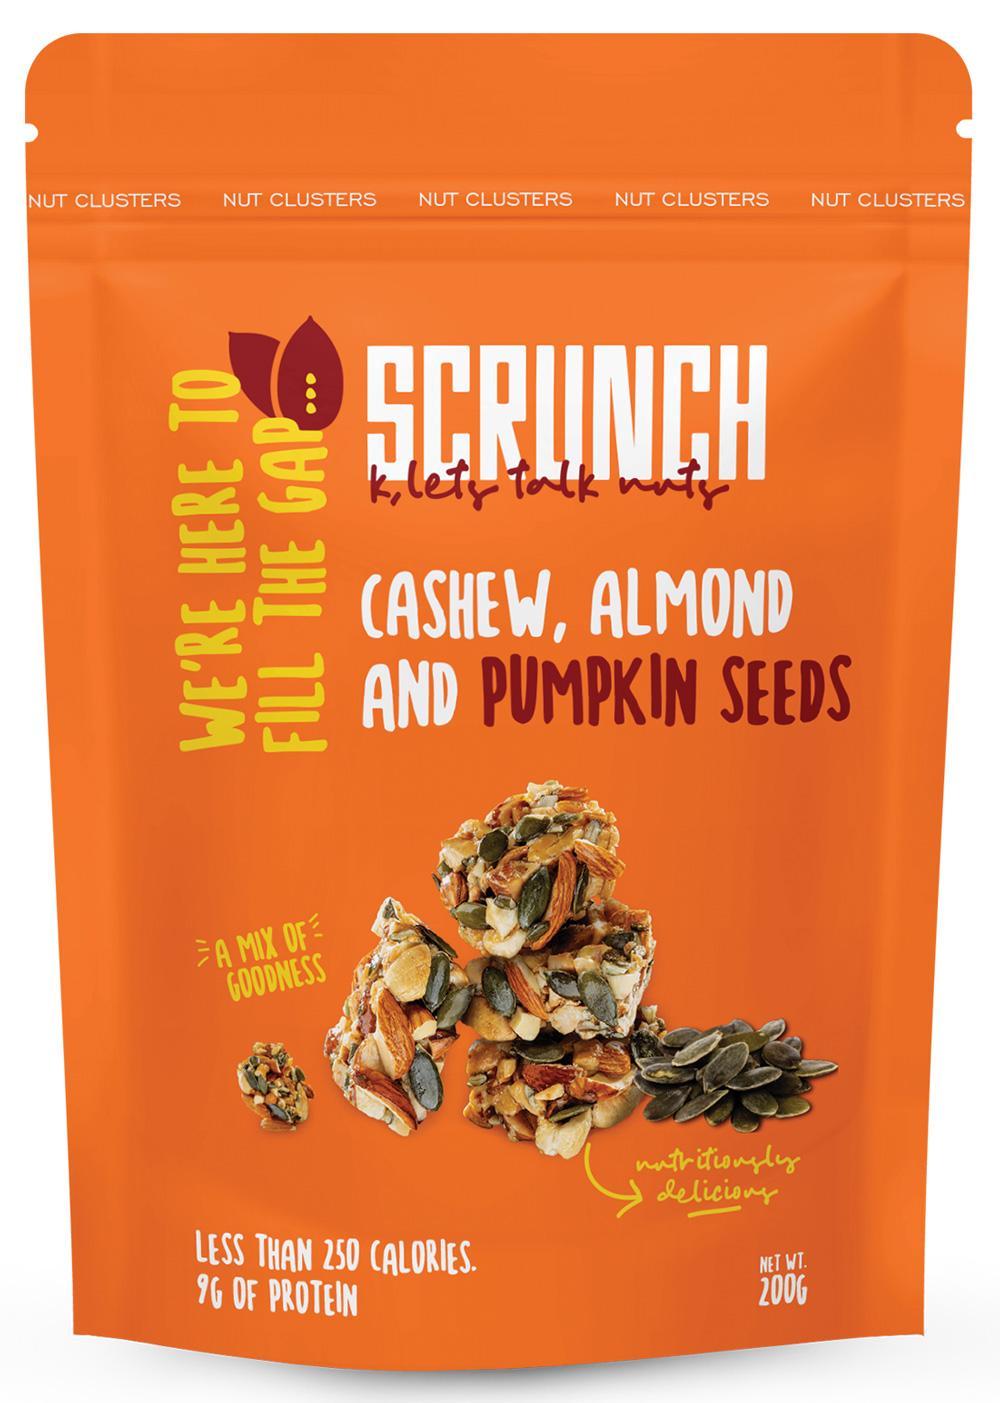 Cashew, Almond And Pumpkin Seed Clusters